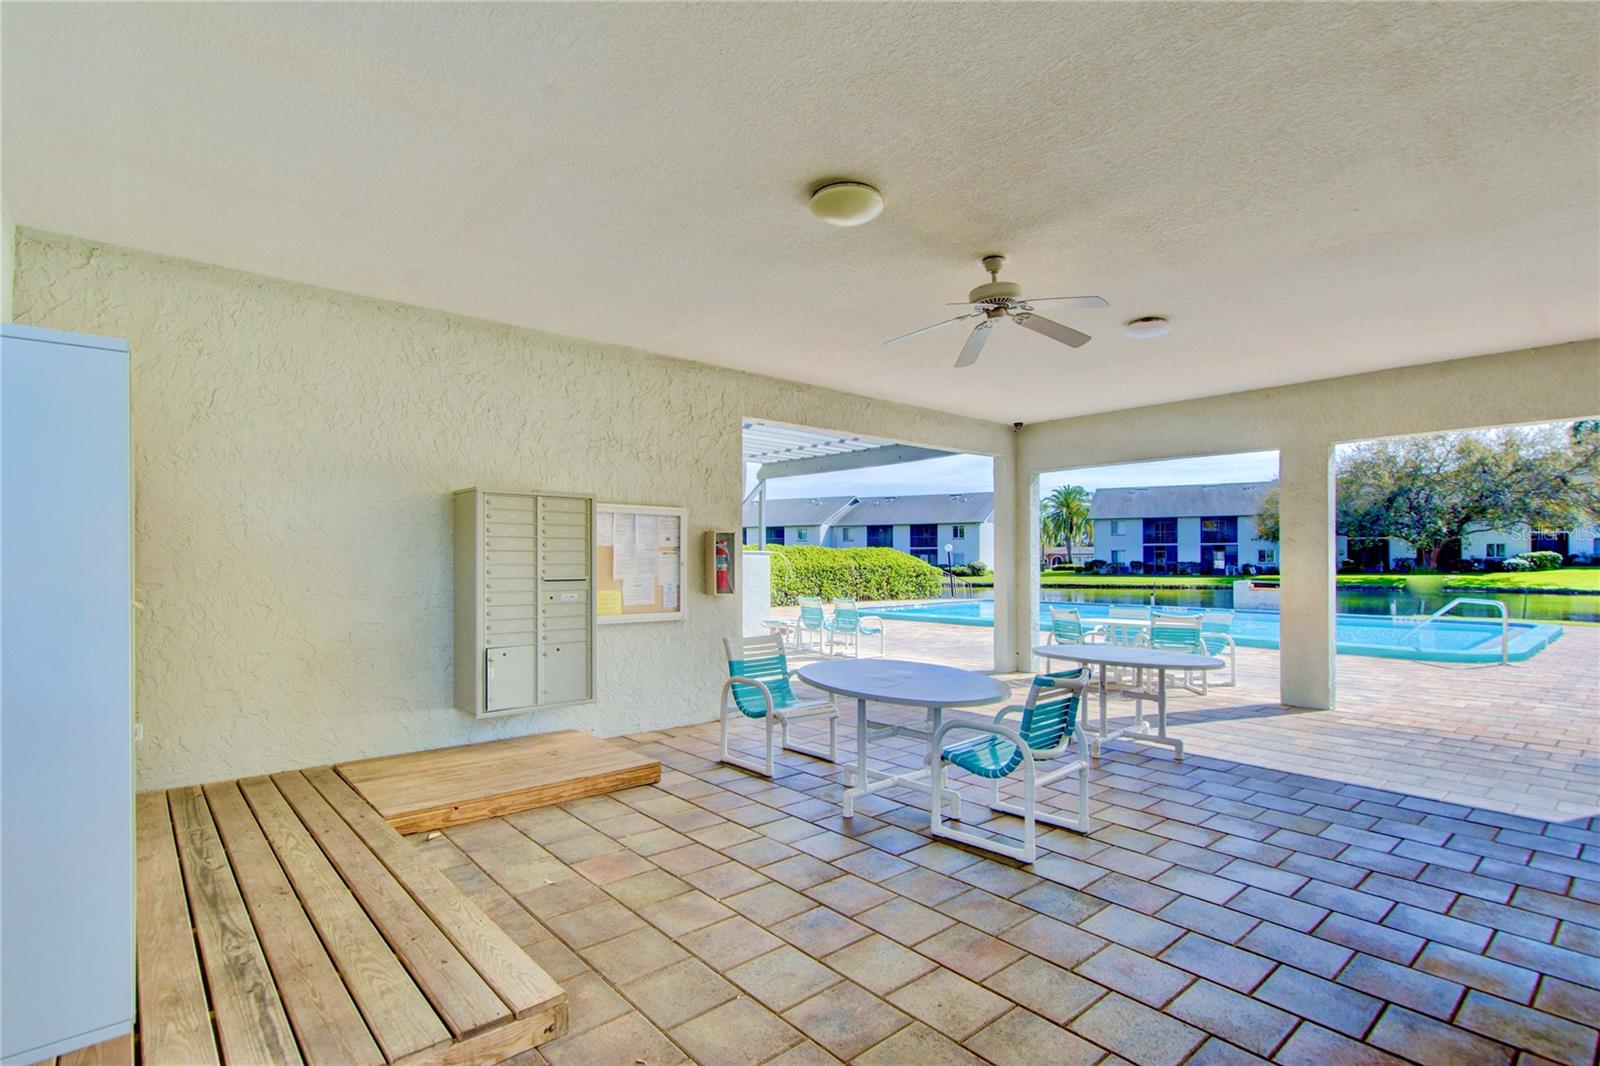 Adjacent to #167 condo is the Waterview Pool on the pond offering the perfect retreat for relaxation and rejuvenation, providing both sunny and shady spots to lounge, play cards/ games, or dine al fresco.